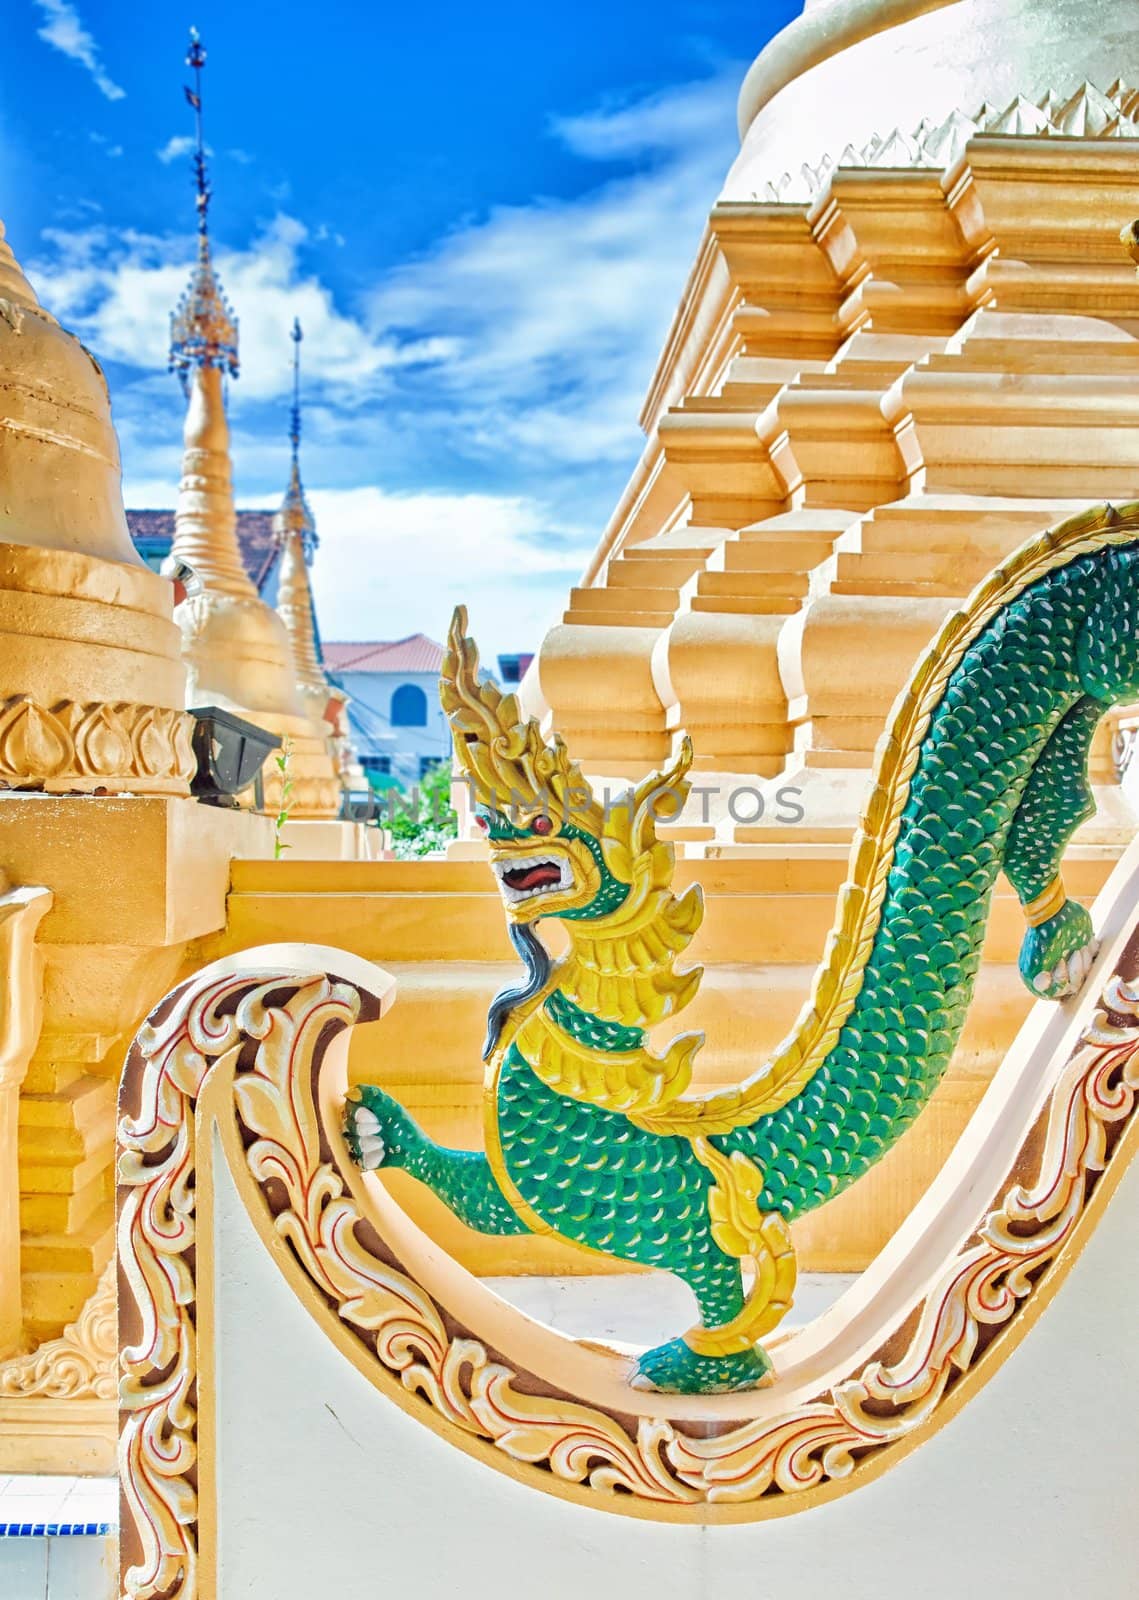 dragon statue in budhist temple by clearviewstock